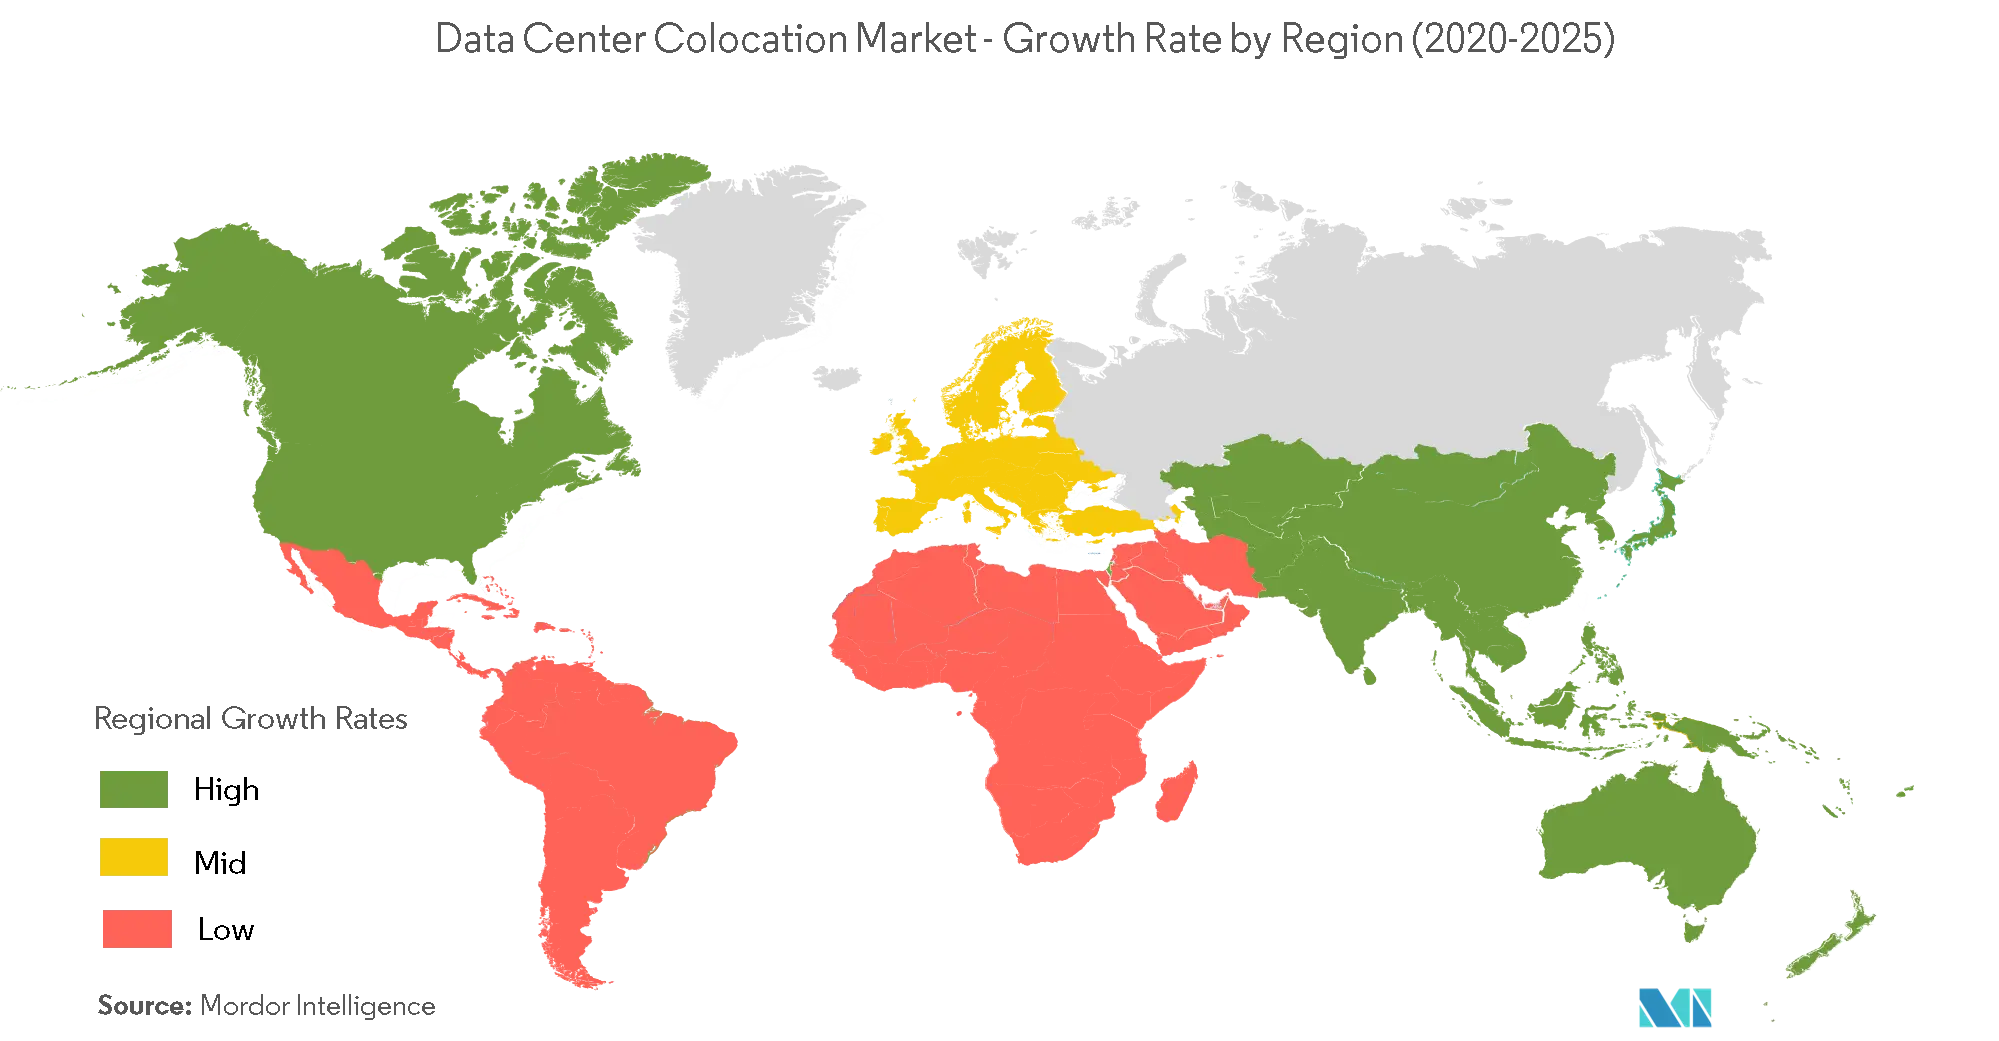 Europe Data Center Colocation Market Growth by Region